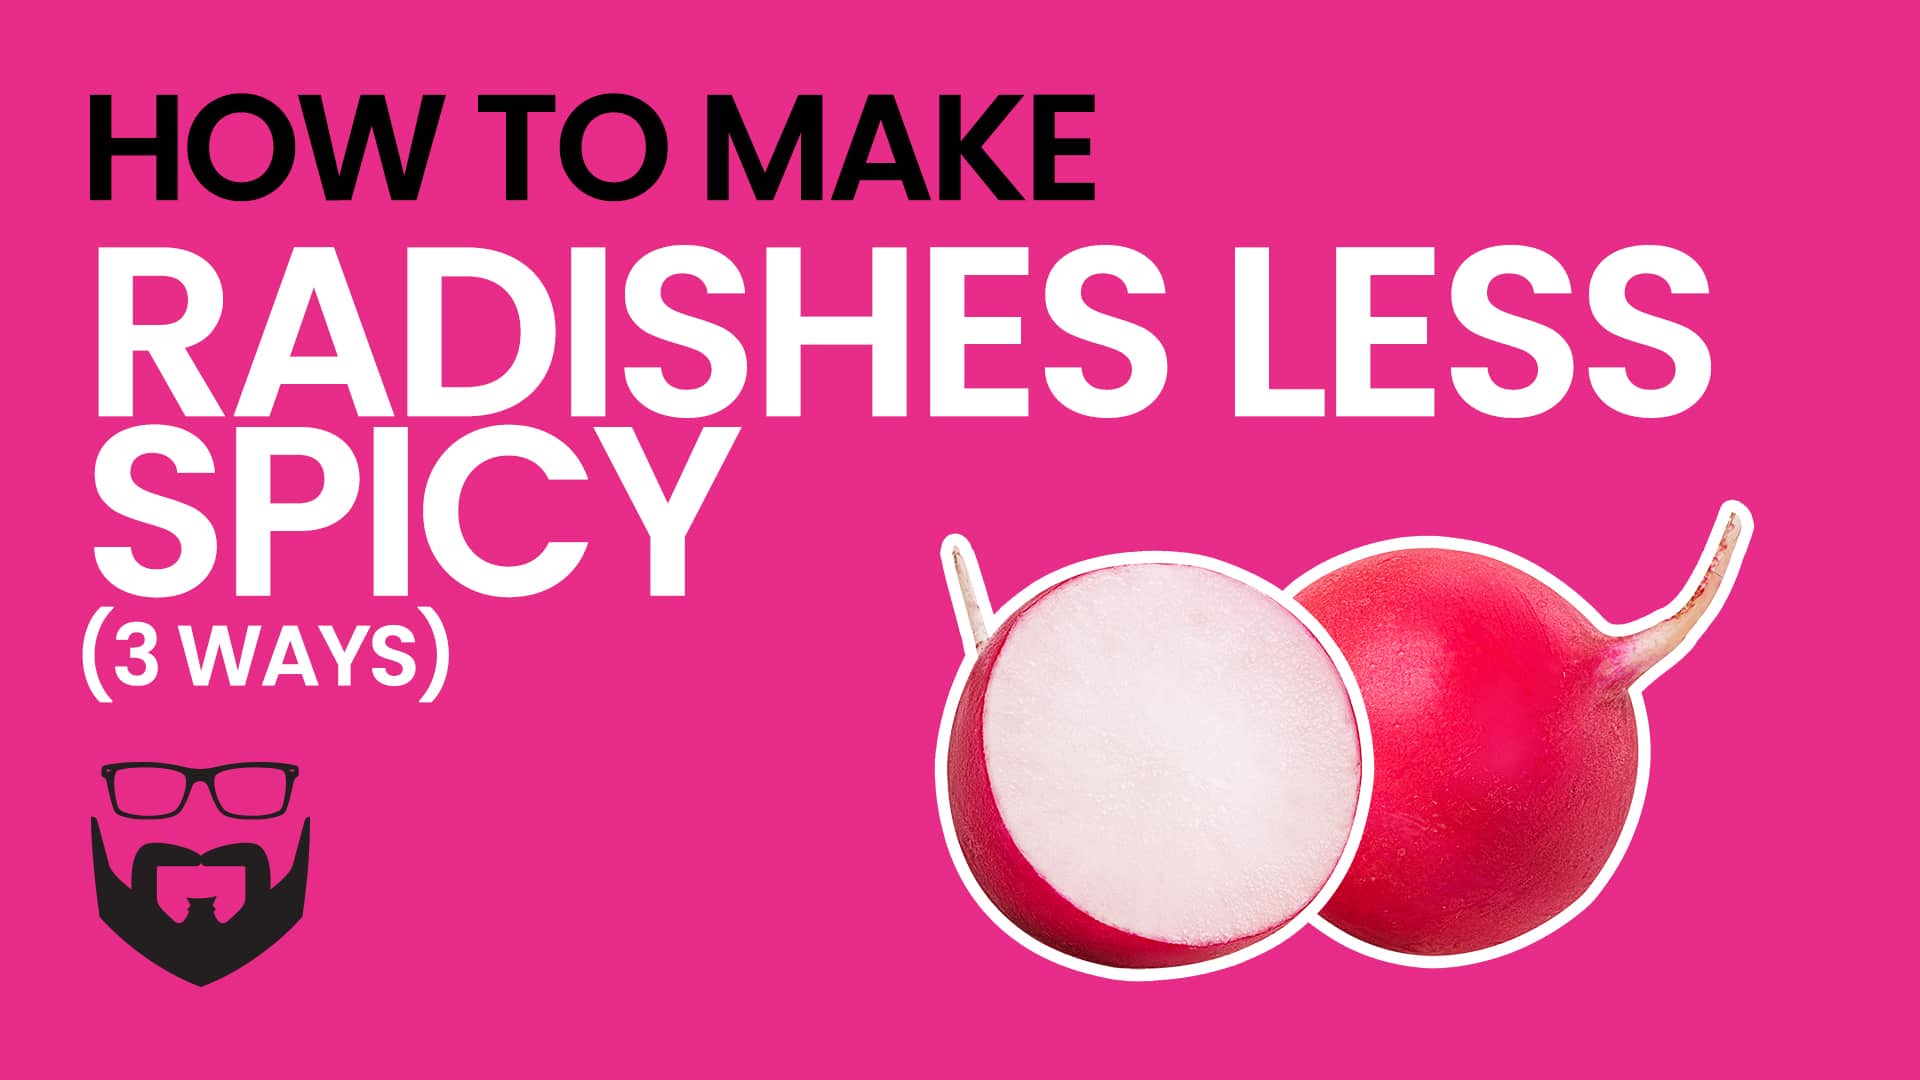 How to Make Radishes Less Spicy (3 ways) Video - Pink